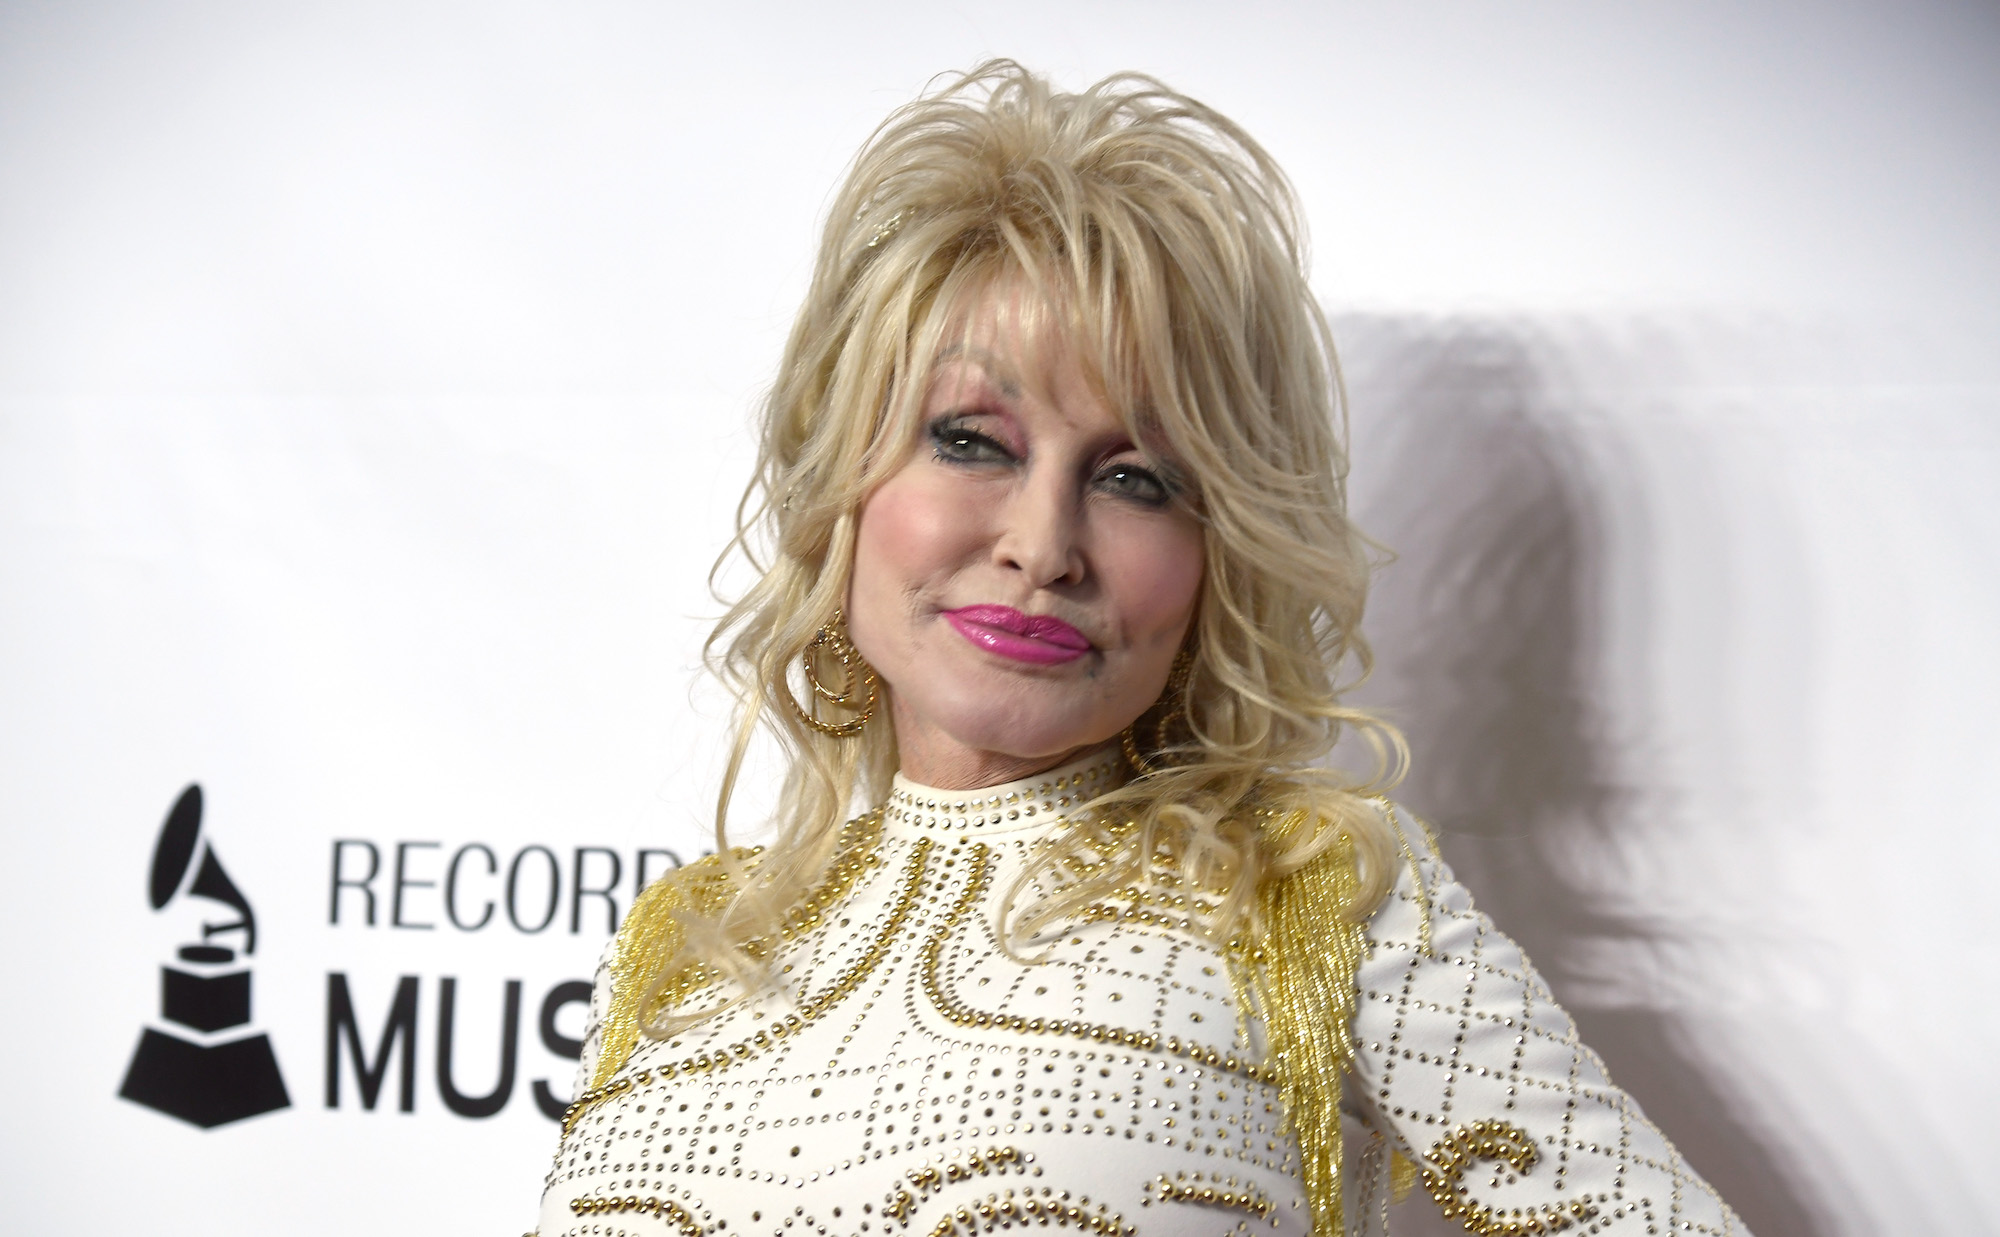 Dolly Parton attending the MusiCares Person Of The Year event in 2019